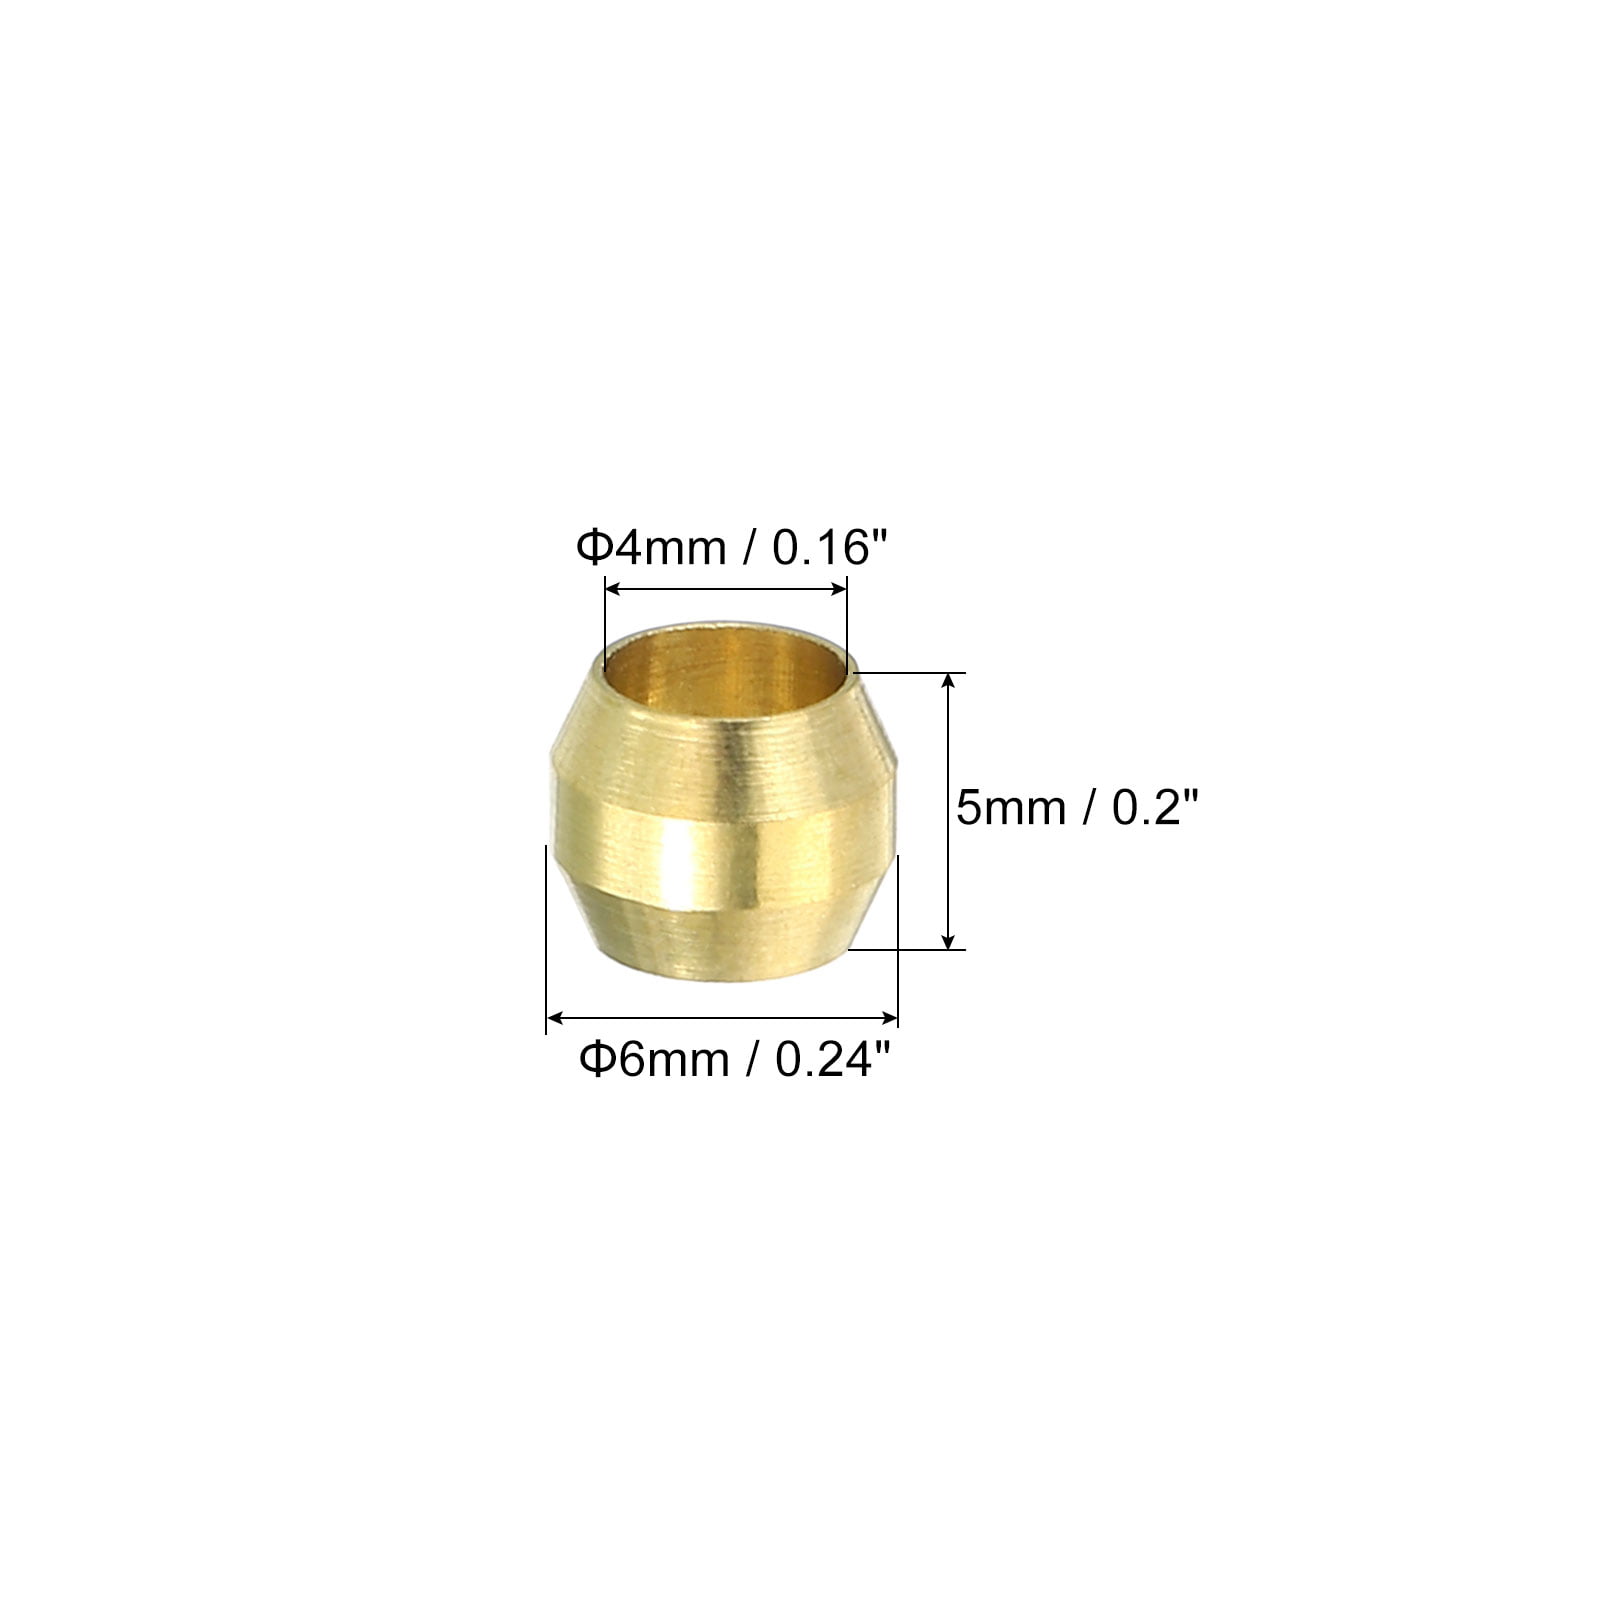 Uxcell 6mm Tube OD Brass Compression Sleeves Ferrules 20 Pcs Brass Ferrule  Fittings Compression Fitting Kit 